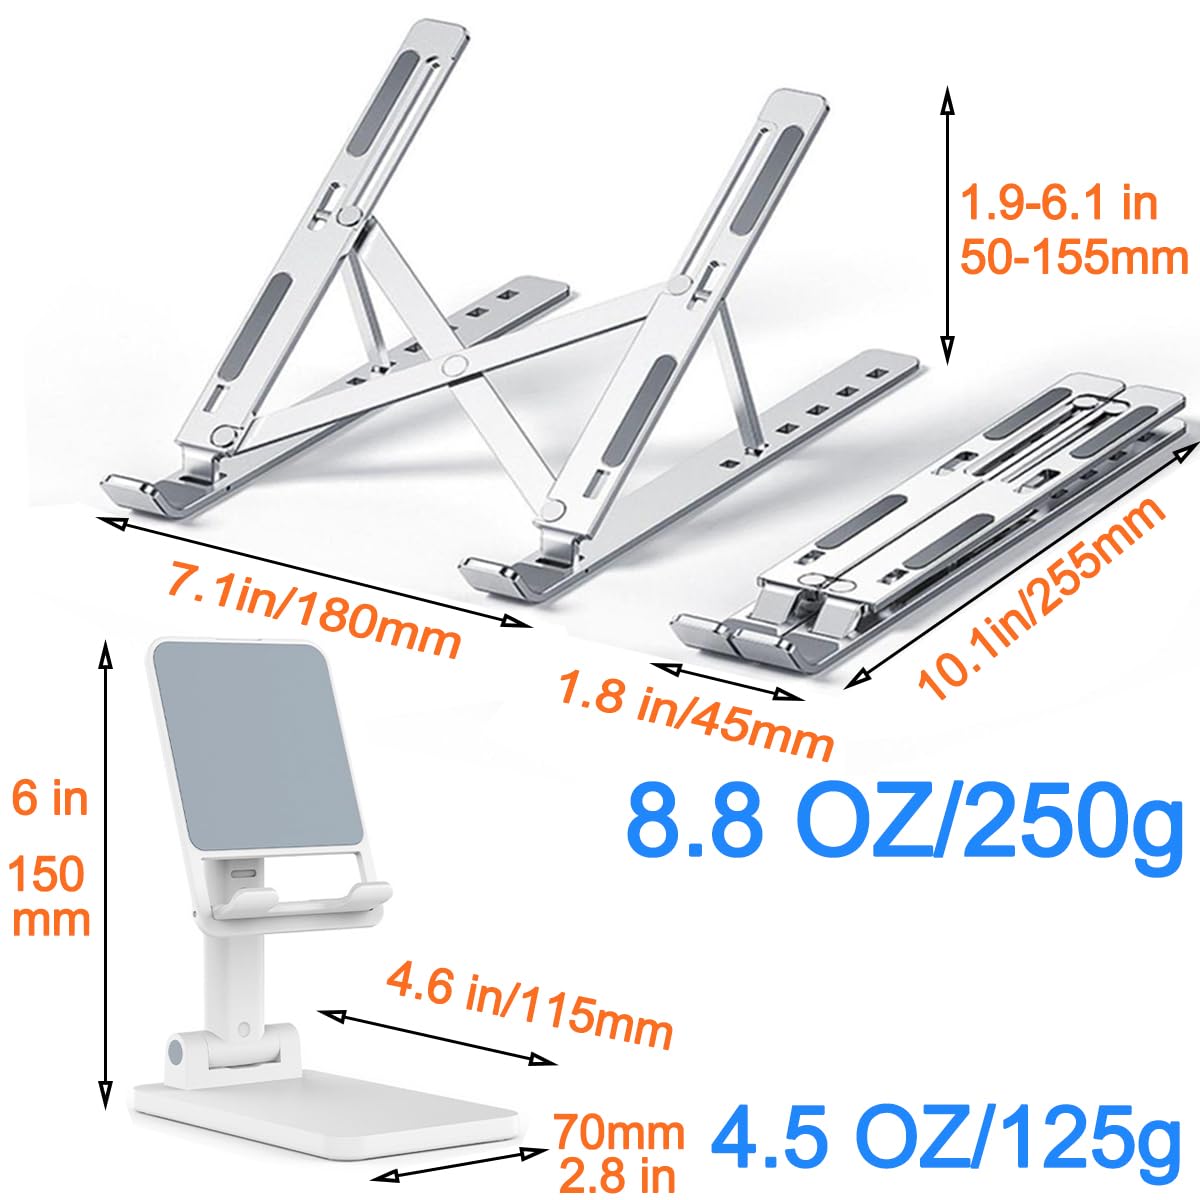 KLAQQED Laptop Stand for Desk, Aluminum Portable Laptop Stand, Phone Stand Holder, Foldable Tablet Notebook Stand for iPad MacBook Stand, Adjustable Height Laptop Stand for Office Desk Accessories